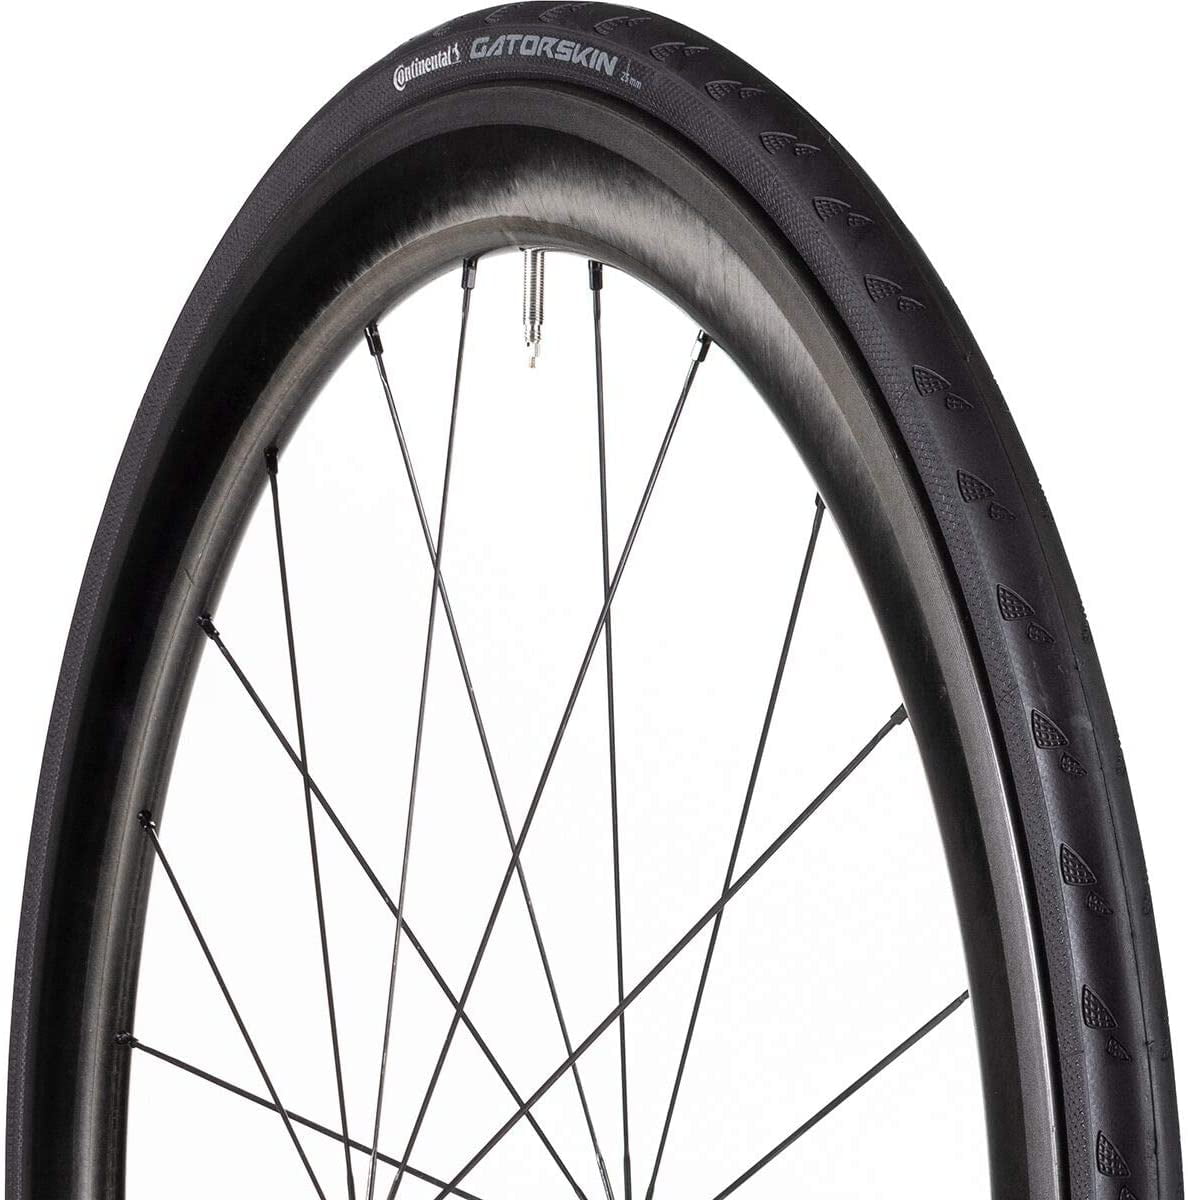 Continental Gatorskin 700 x 23C Bicycle Tyre for sale online